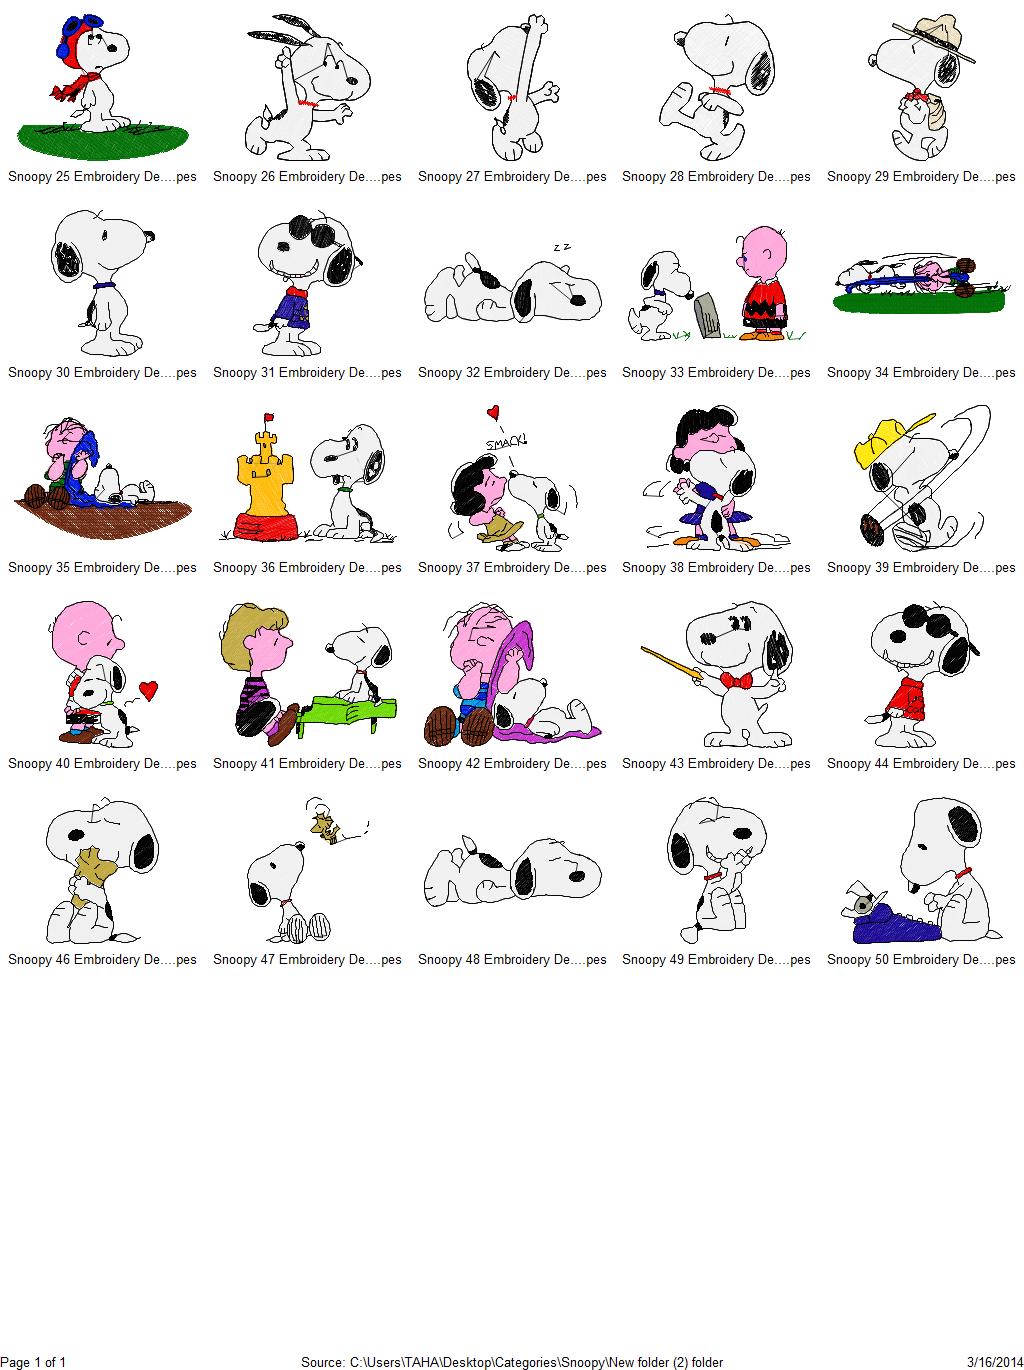 Snoopy Embroidery Designs